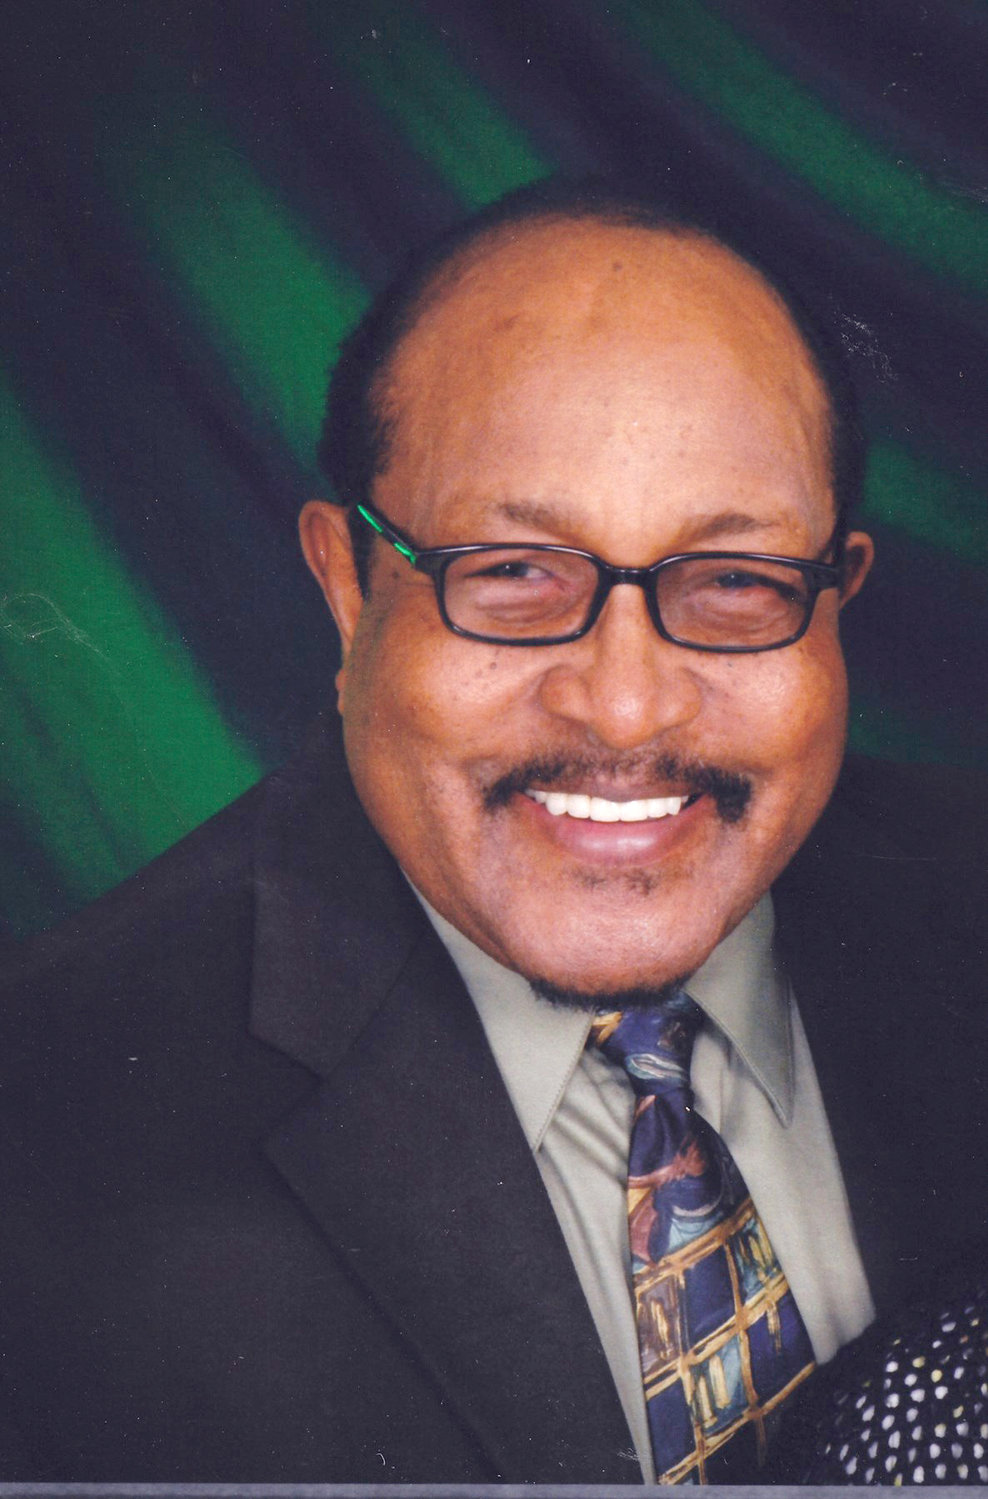 Earl Nelson, who was a Michigan State University graduate and music teacher at Otto Middle School, founded the choir in the early 1960s to bring attention to and preserve the dignity of Black spiritual music.